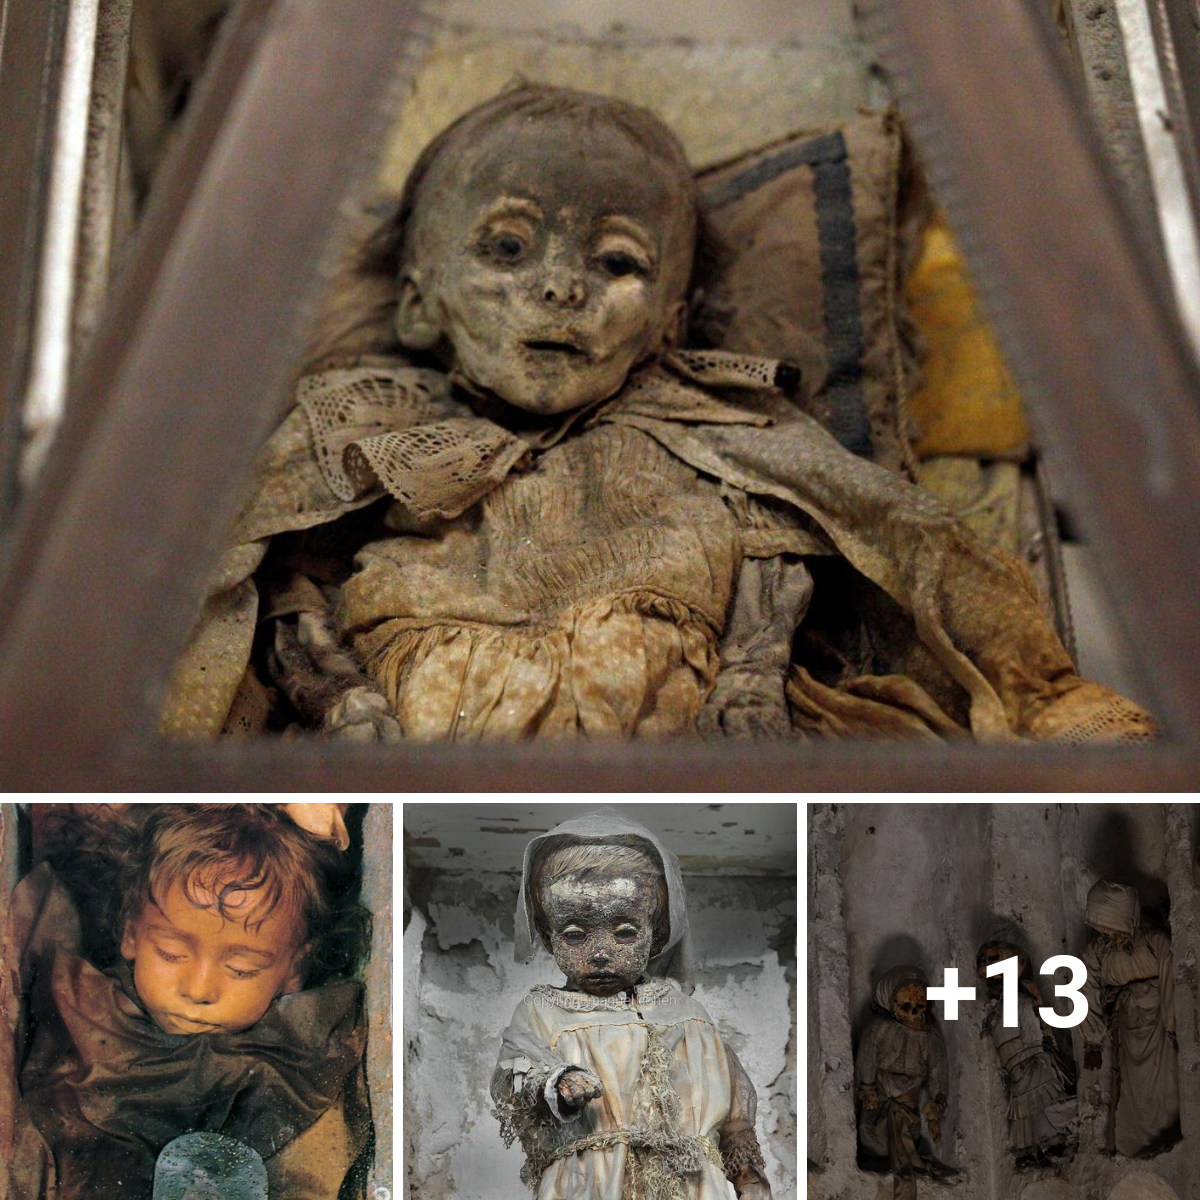 The Lives and Deaths of Forty-One Mummified Children in the Capuchin Catacombs: An Enigma Sought to Be Solved